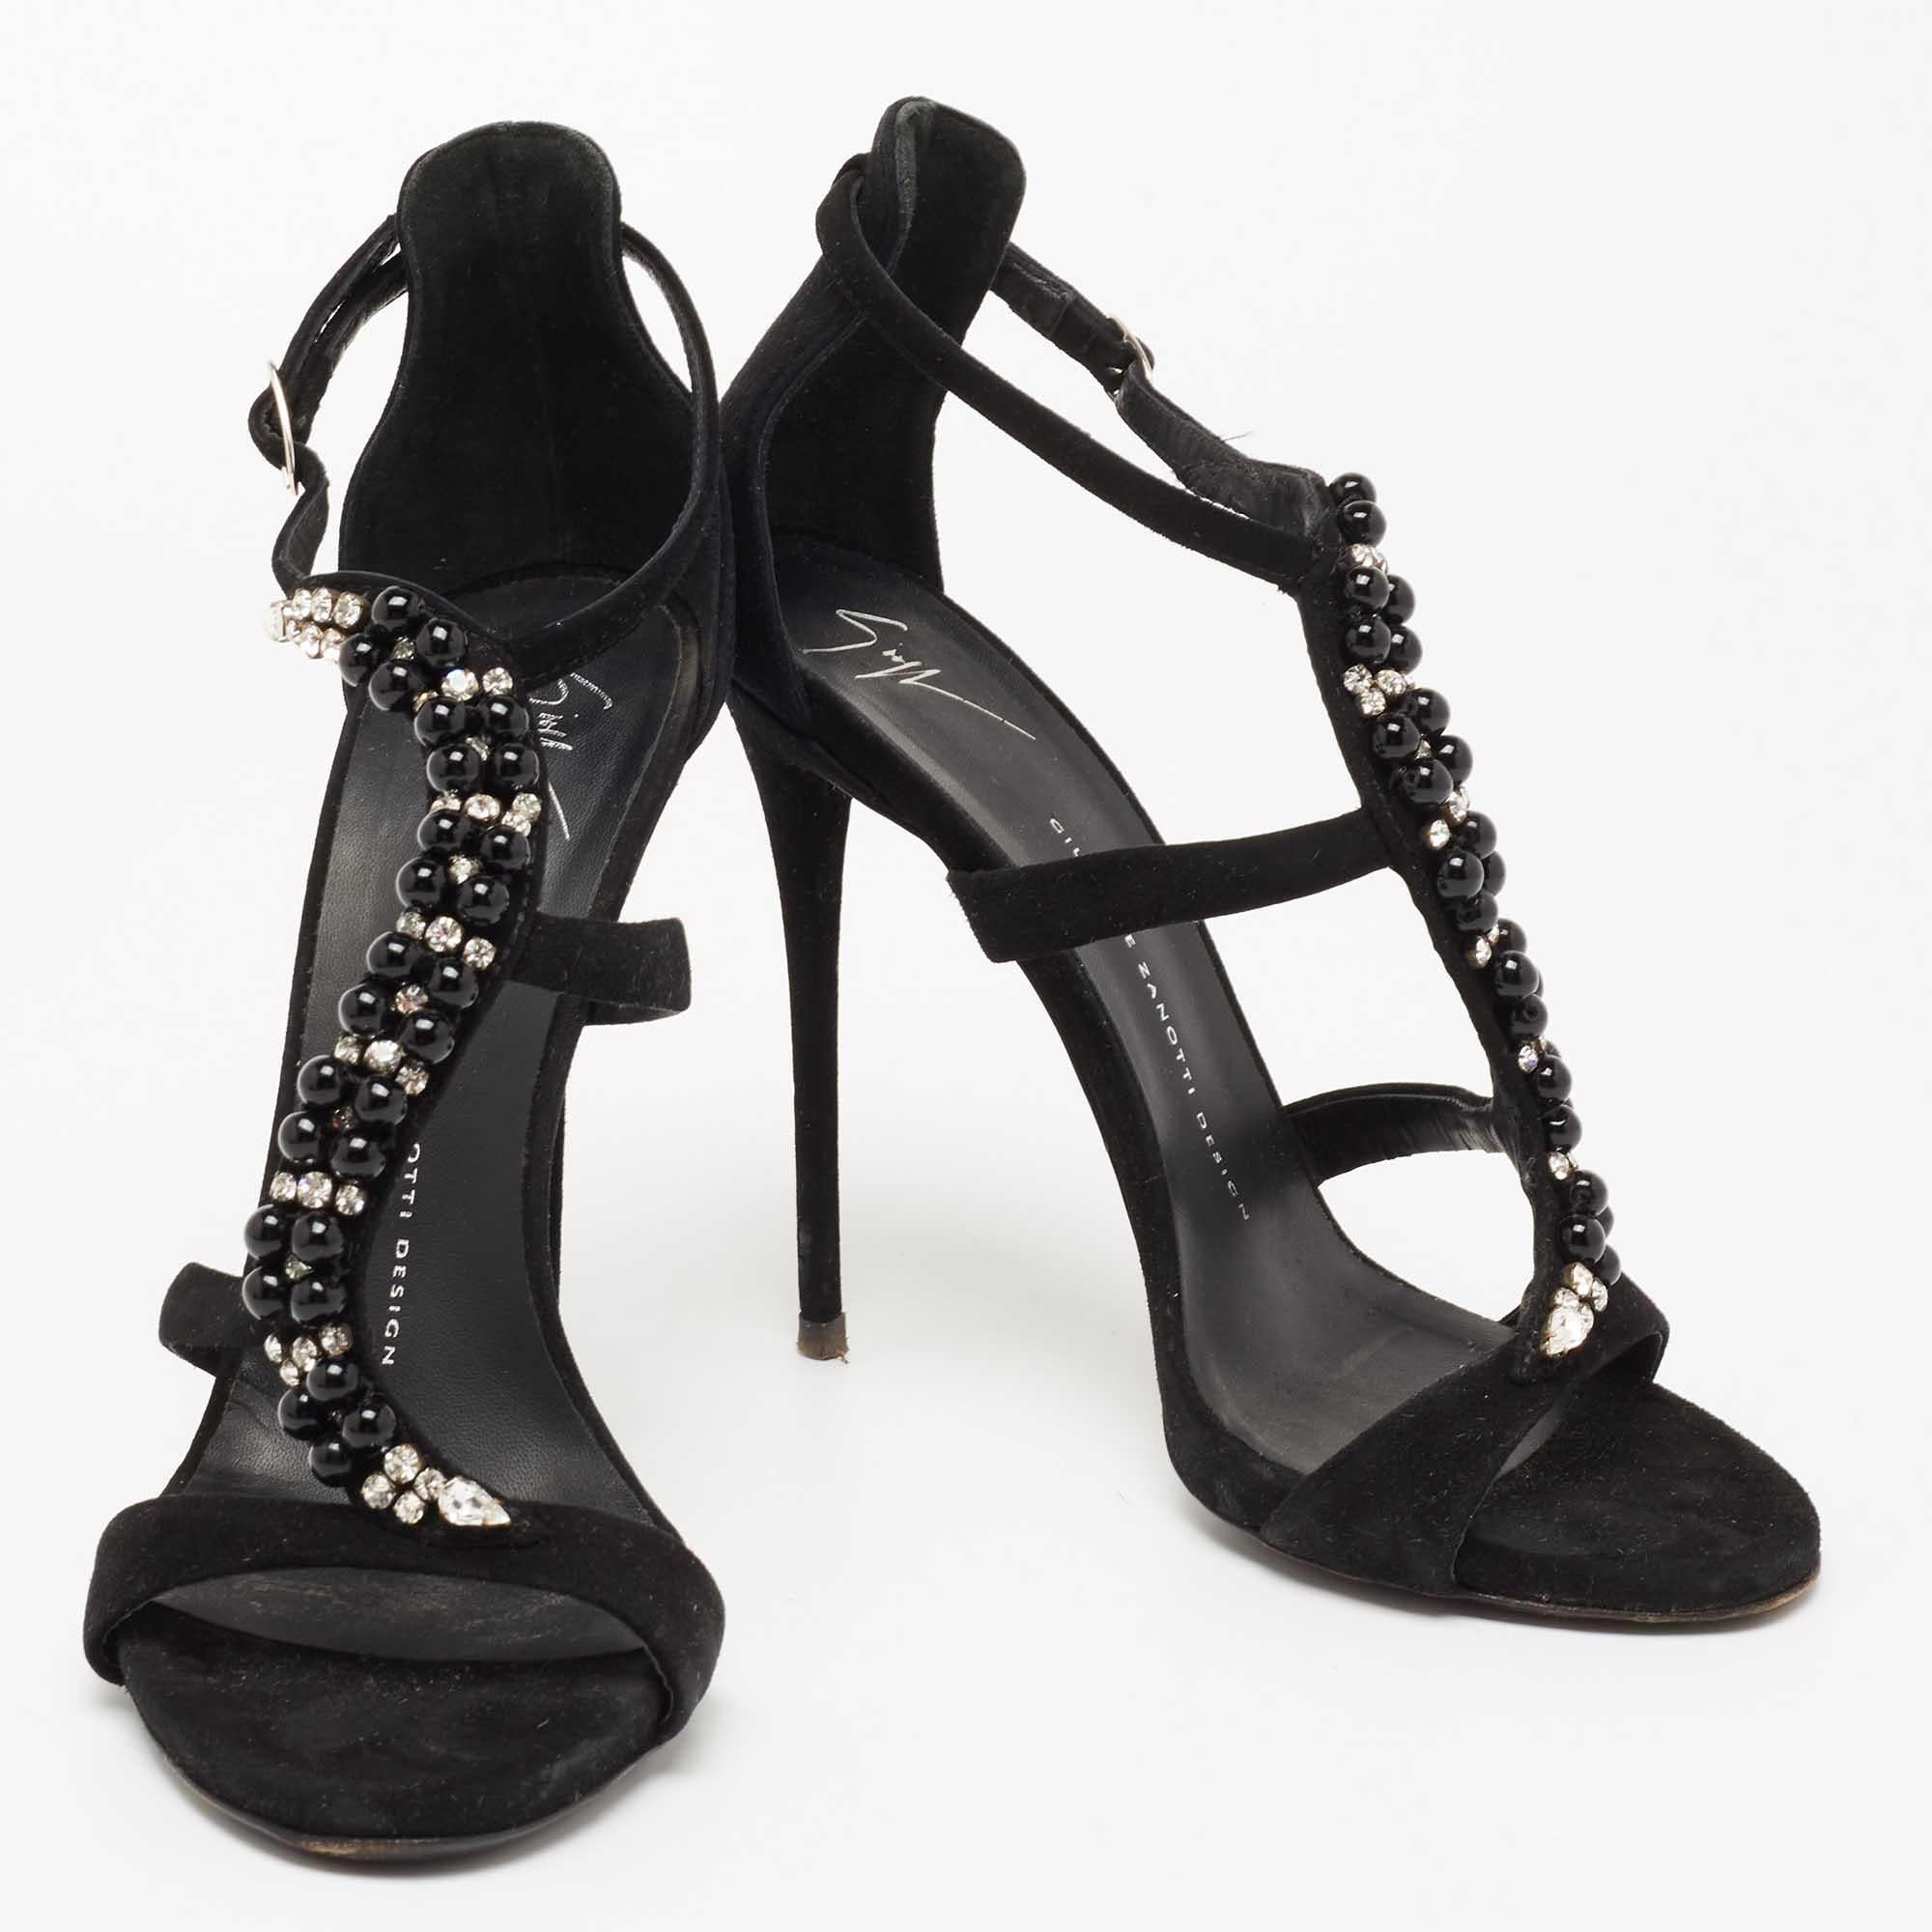 These sandals from Giuseppe Zanotti will lend a stylish and glamorous edge to your feet. This beautiful pair of suede sandals carries a classic shade of black. It has crystal-embellished T-straps, buckled closures, and 13 cm heels. The sandals are